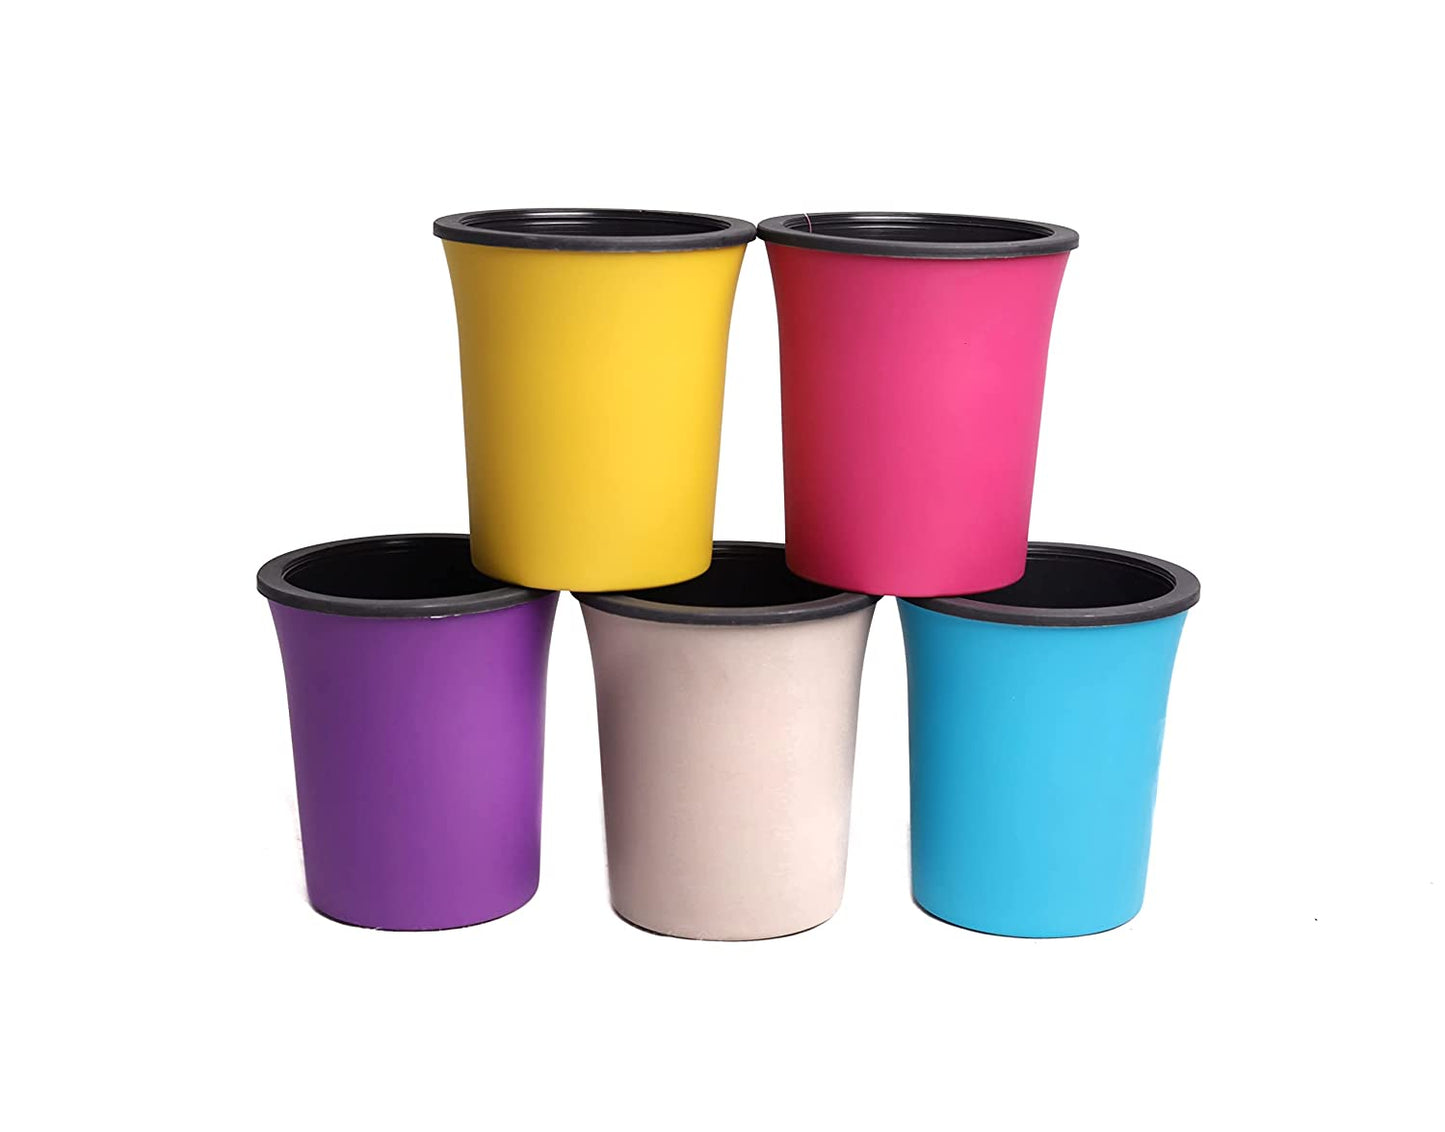 Oslo self watering planter (Assorted colour) - Set of 3